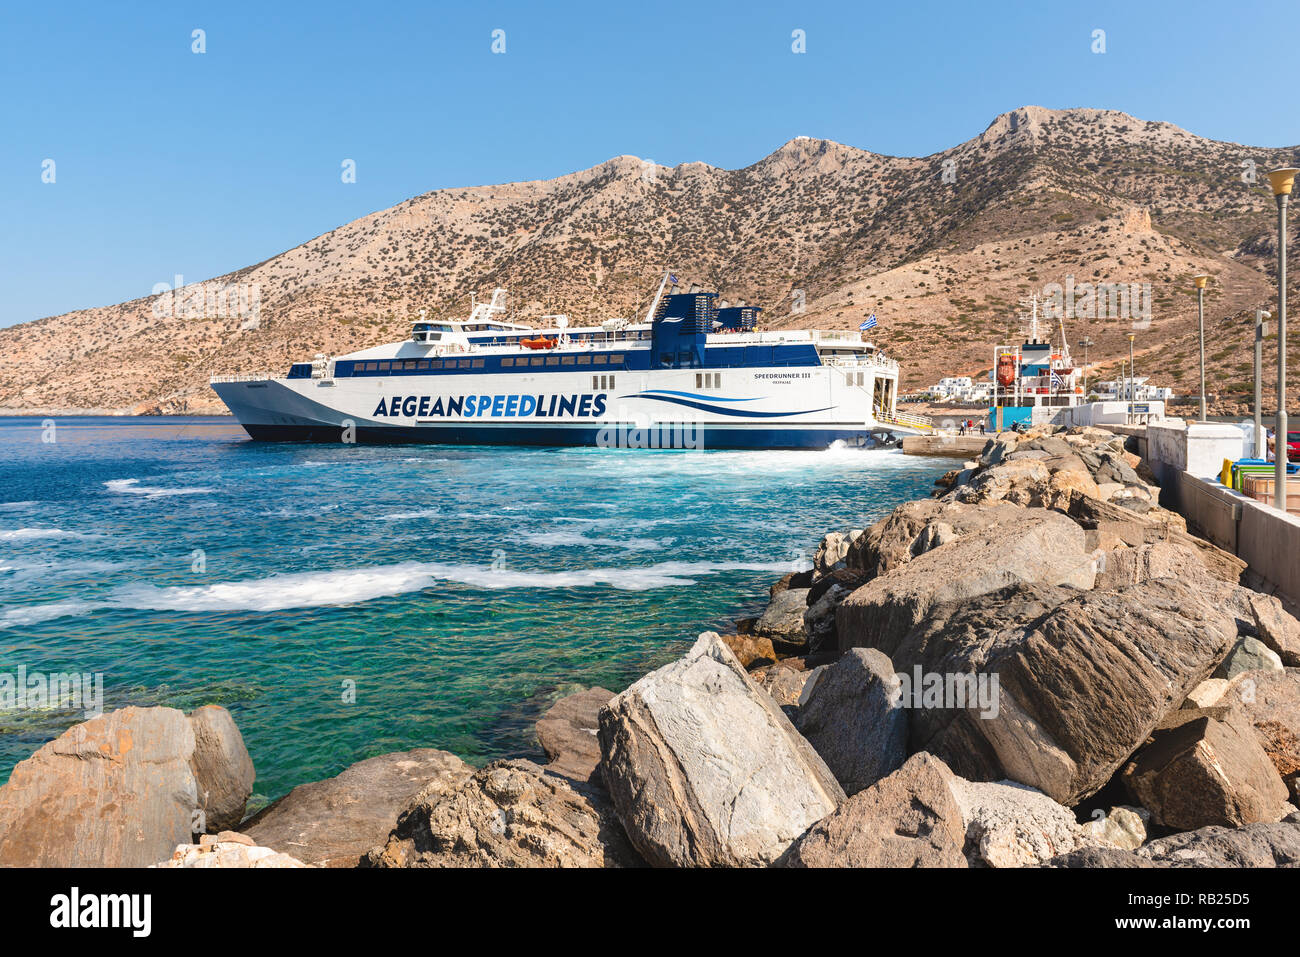 SIFNOS, GREECE - September 10, 2018: Speed Runner III ferry boat arrived at port of Kamaresi town in Sifnos Greece. Stock Photo